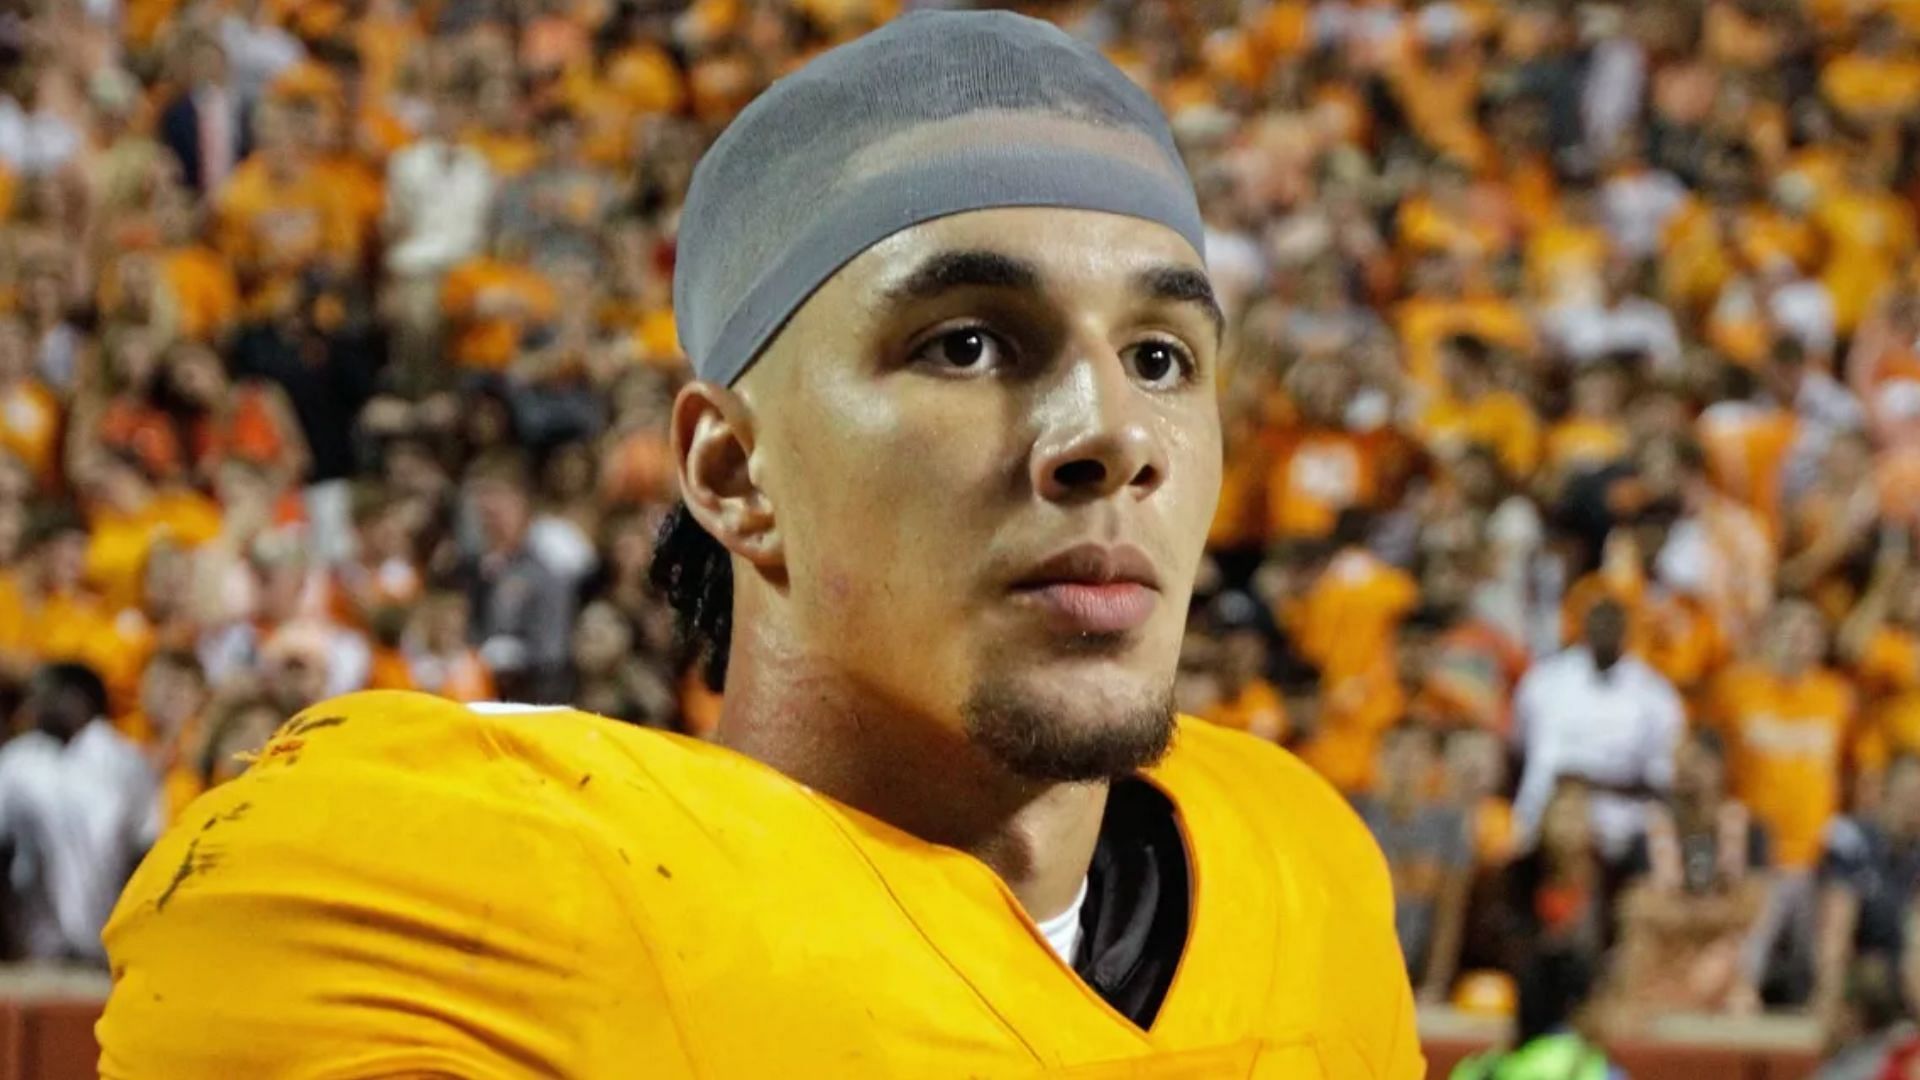 Jalen Hurd played for Tennessee and Baylor before getting drafted in the NFL. (Image credit: Wade Payne/Associated Press)